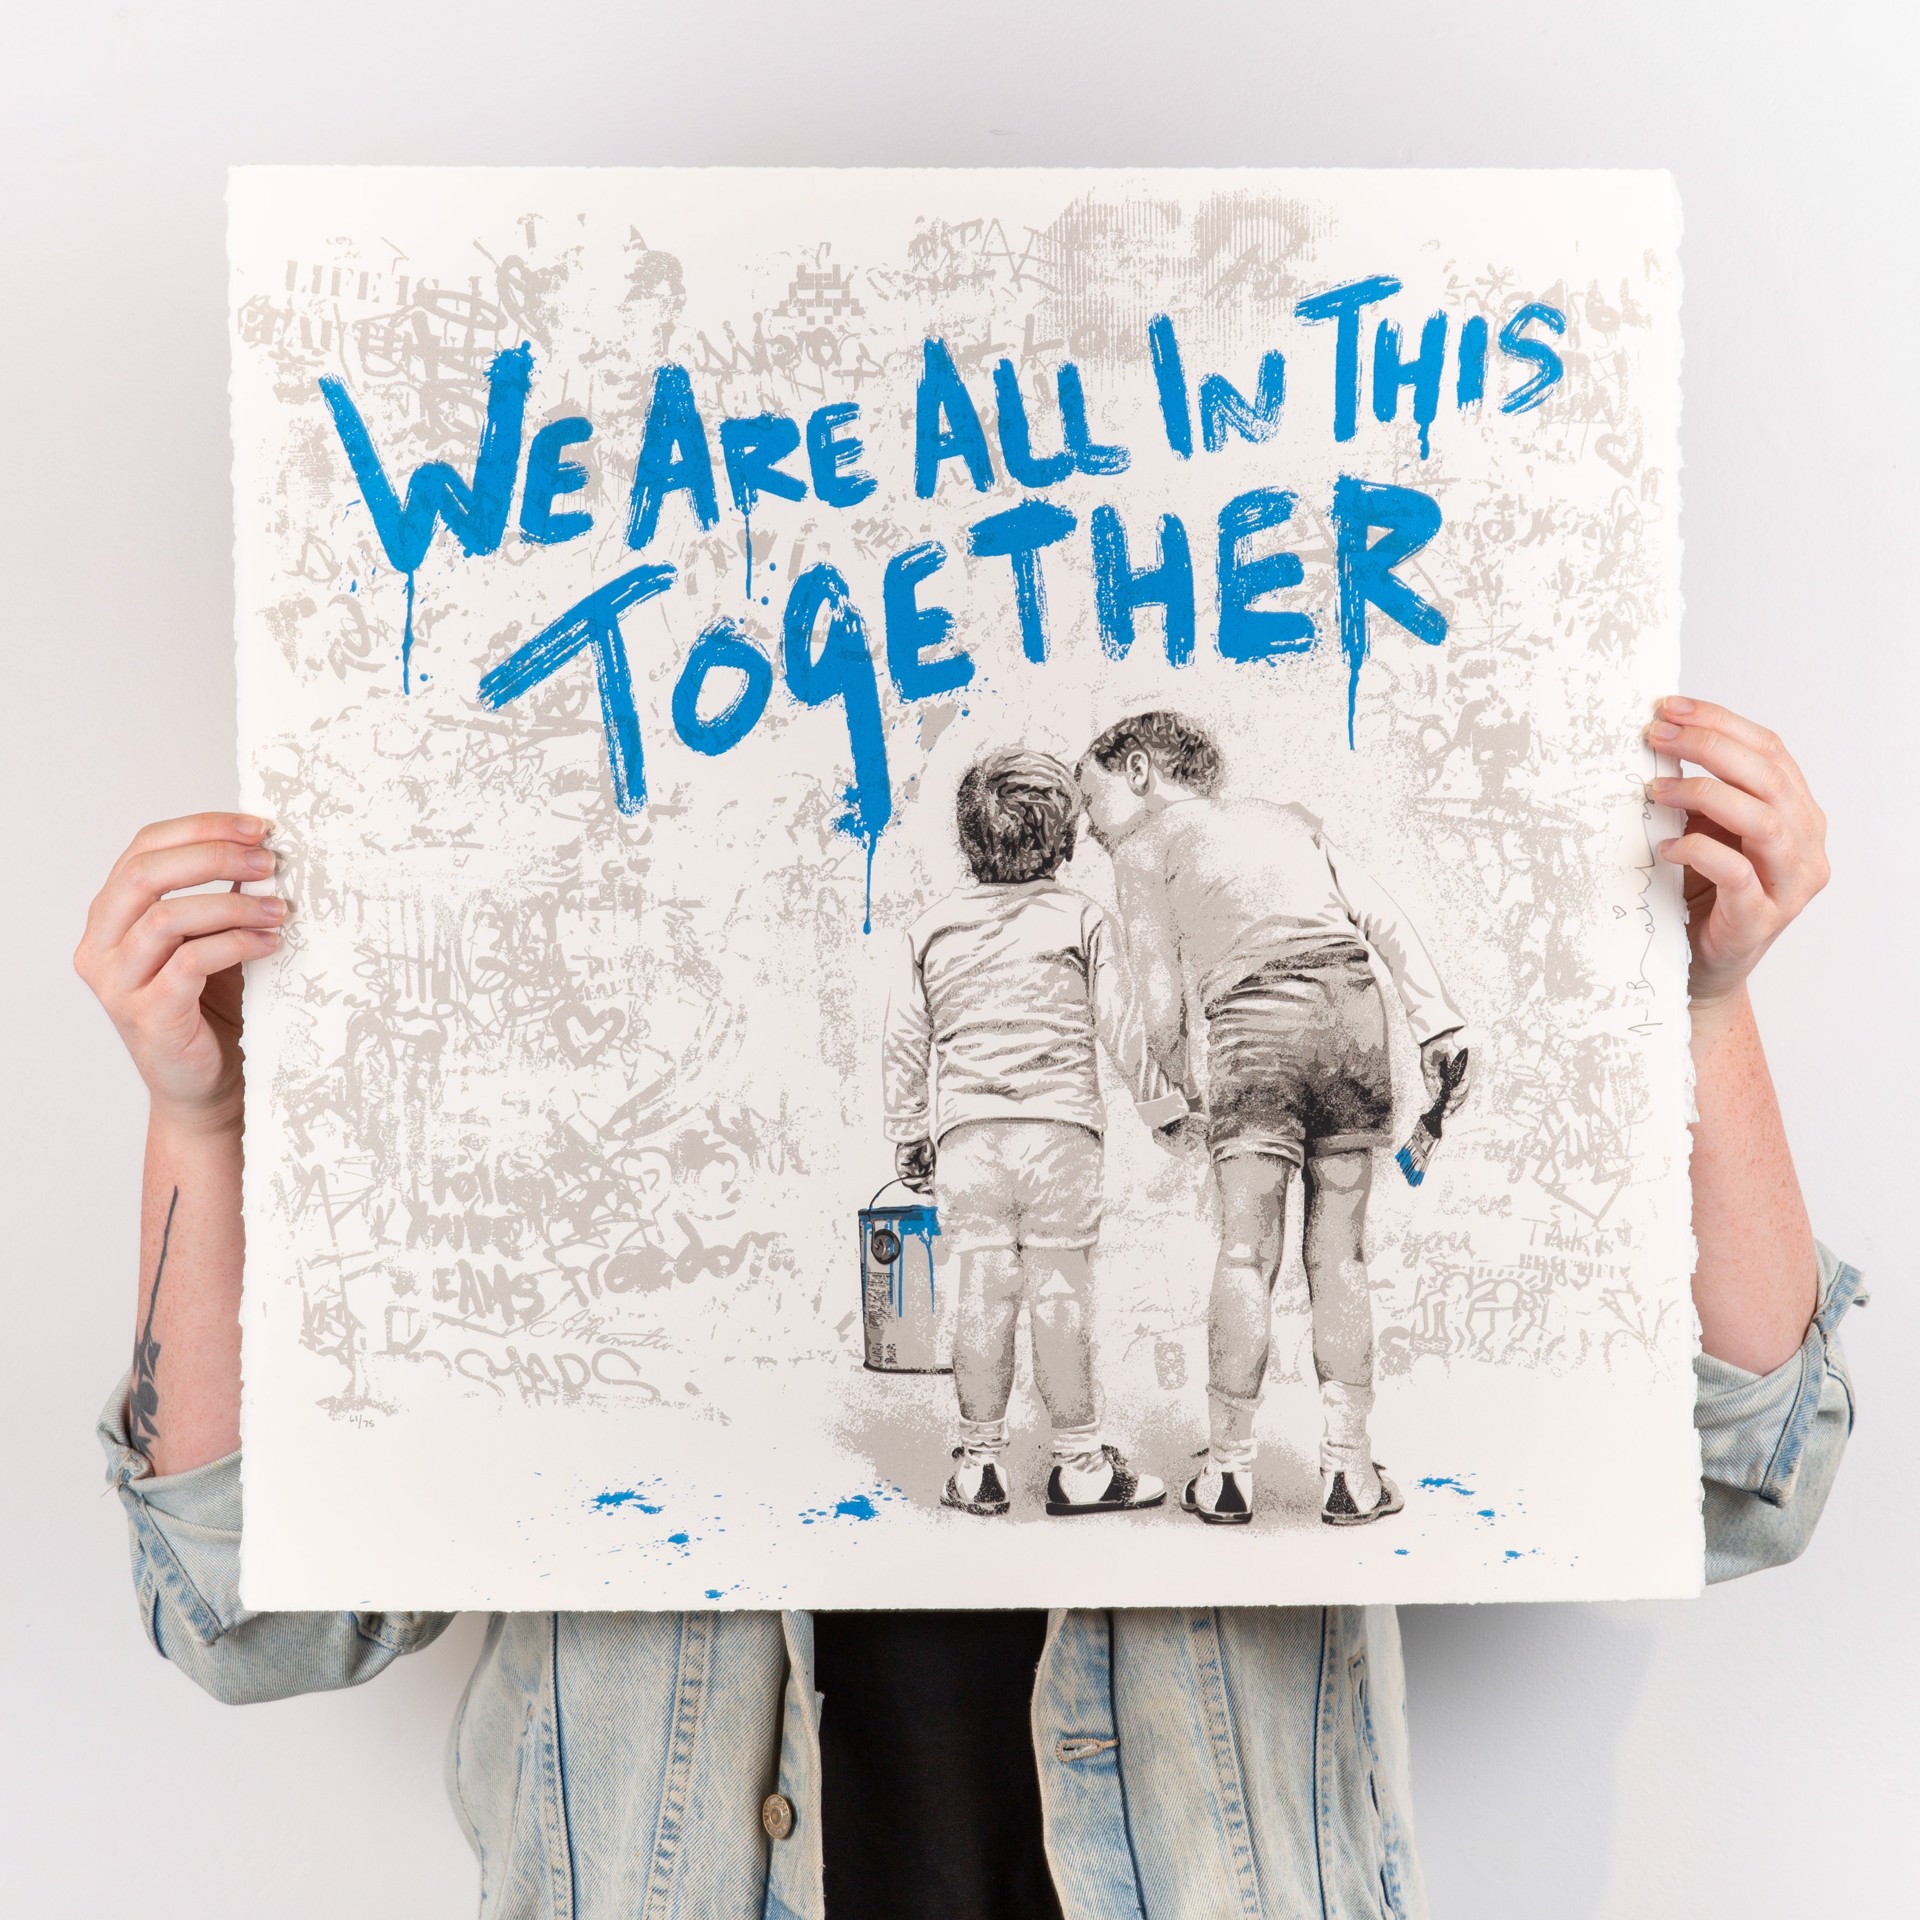 We Are All In This Together (blue) by Mr.Brainwash